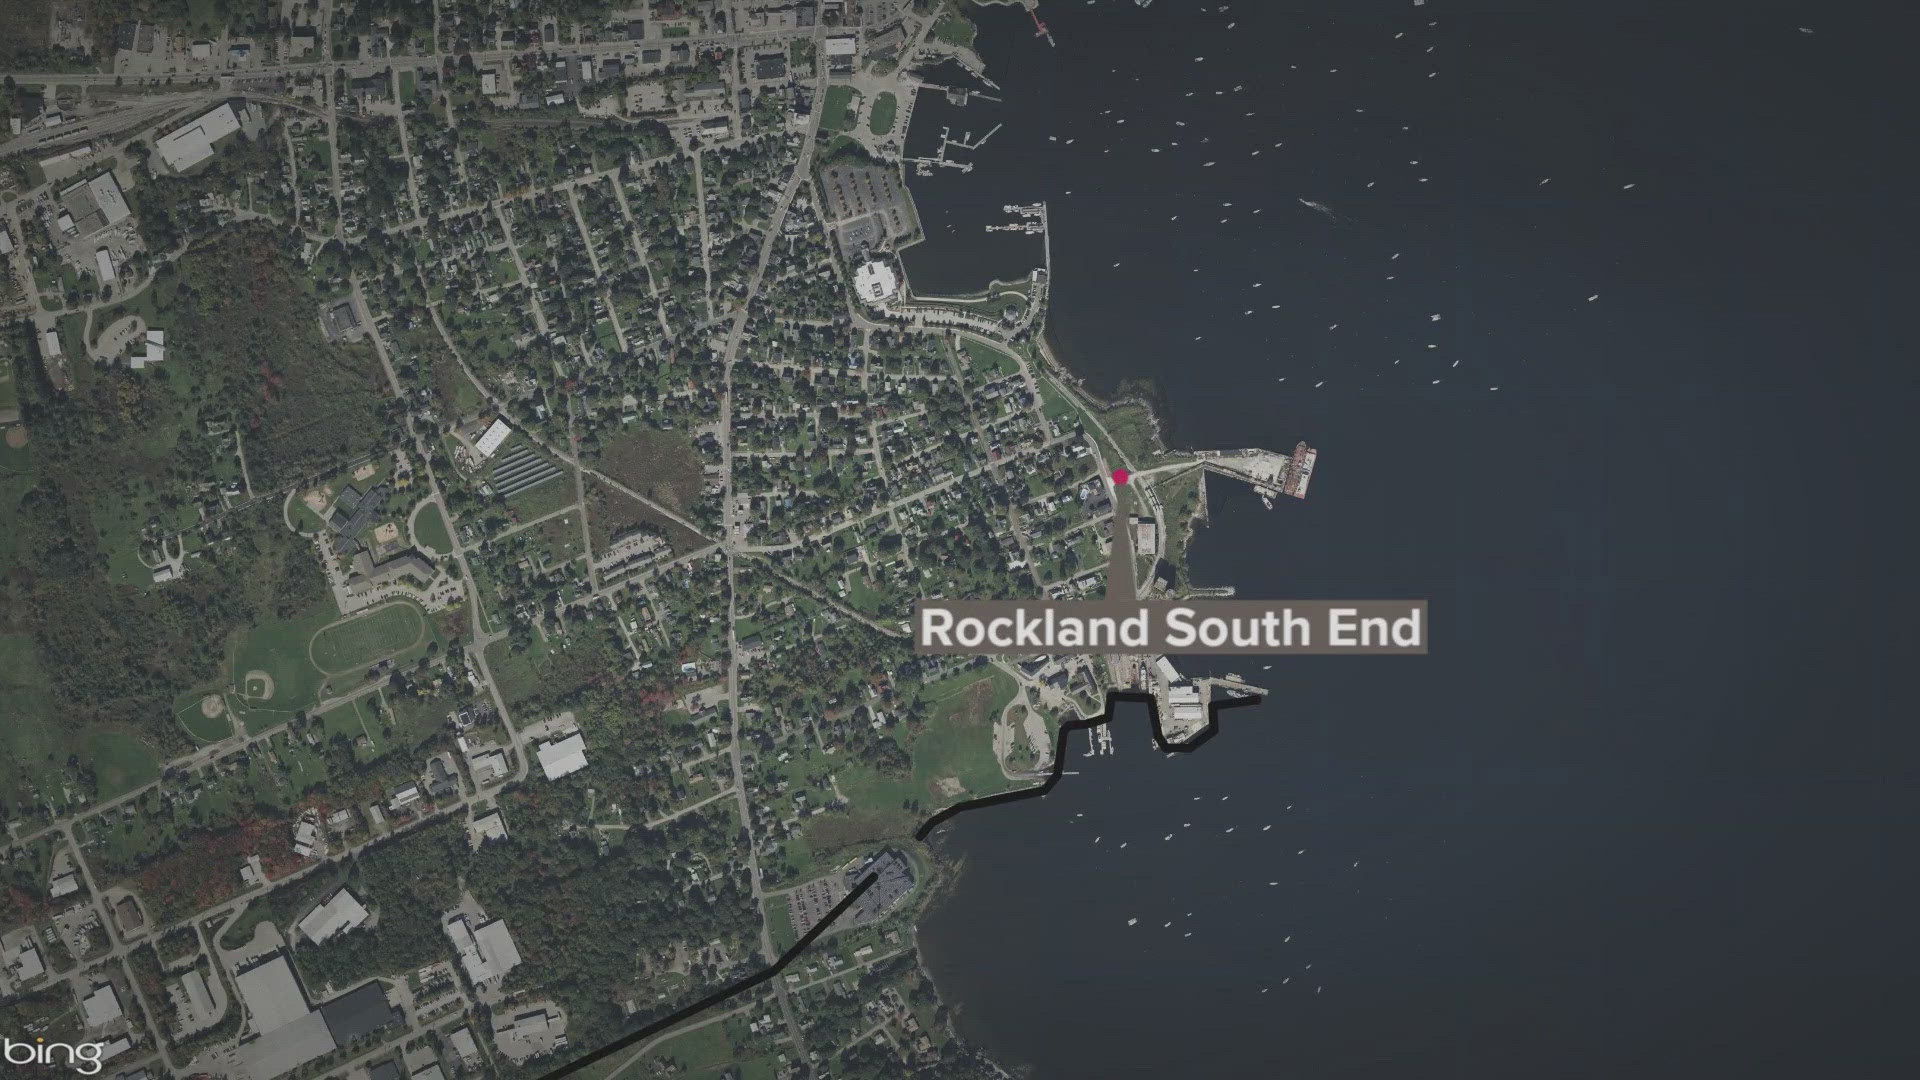 Police said they received reports early Wednesday morning about three minors in Rockland appearing to check doors on vehicles. Police are investigating.